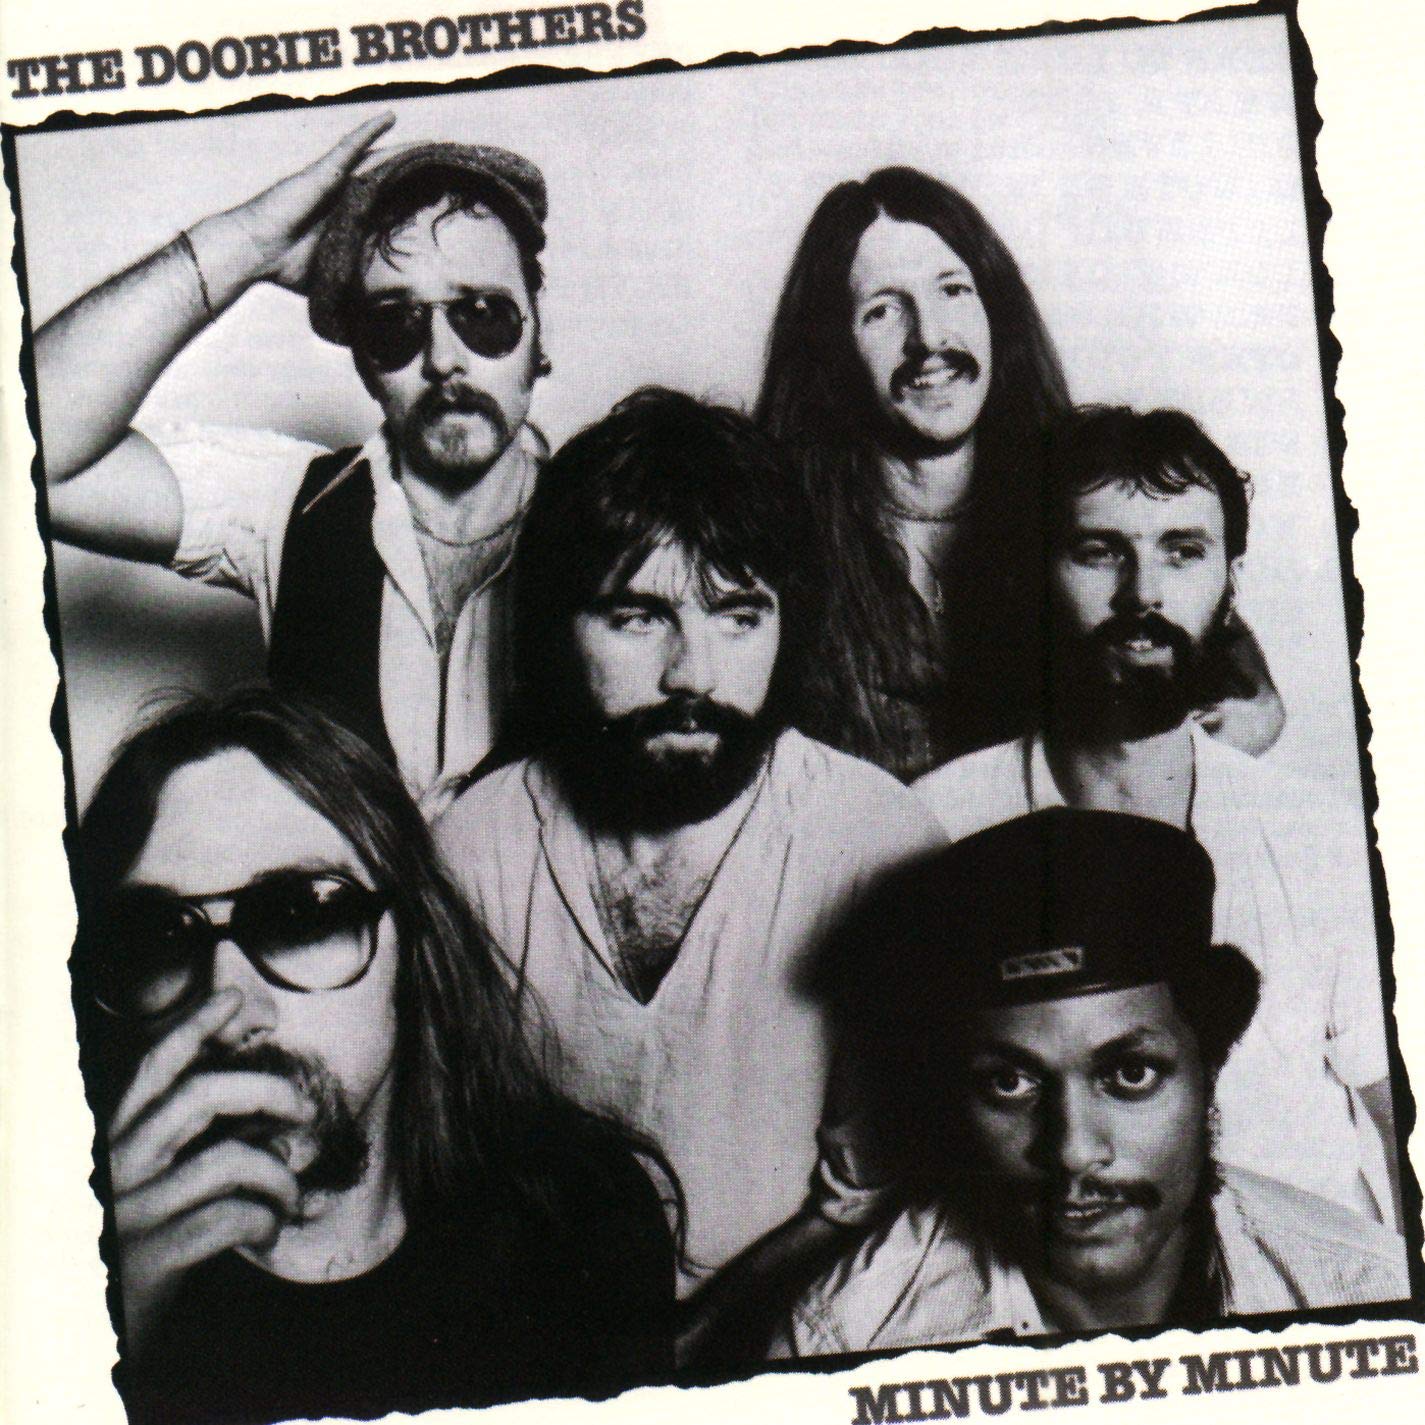 The Doobie Brothers Minute by Minute